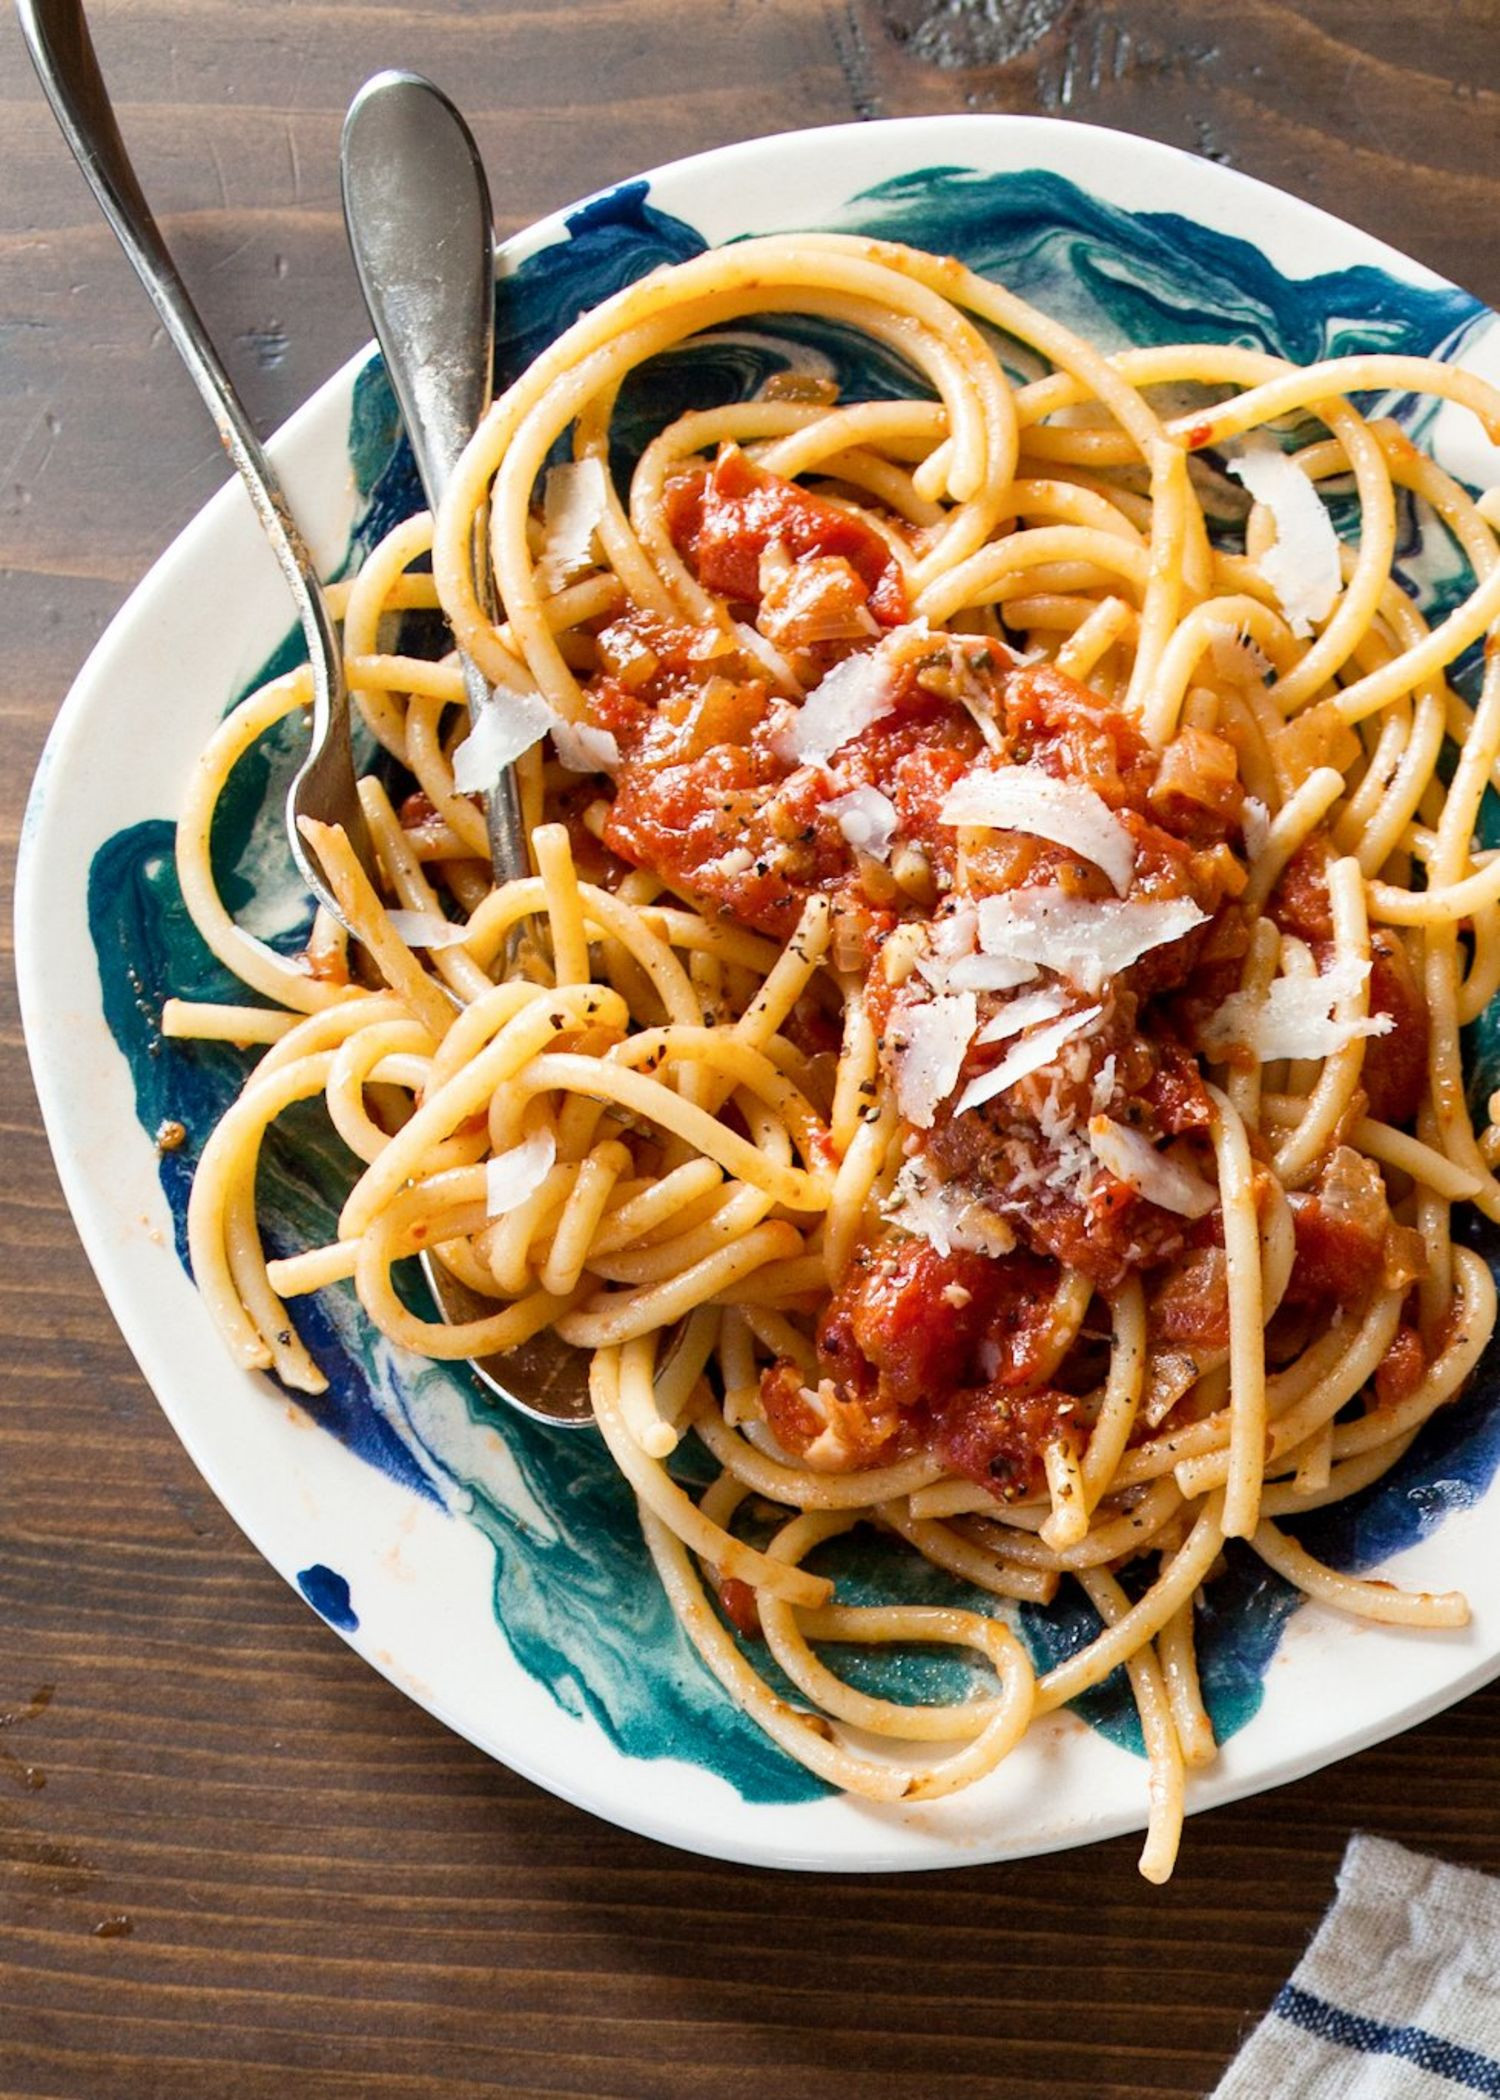 Simple Pasta Sauces
 5 Easy Pasta Sauces Every Home Cook Should Know